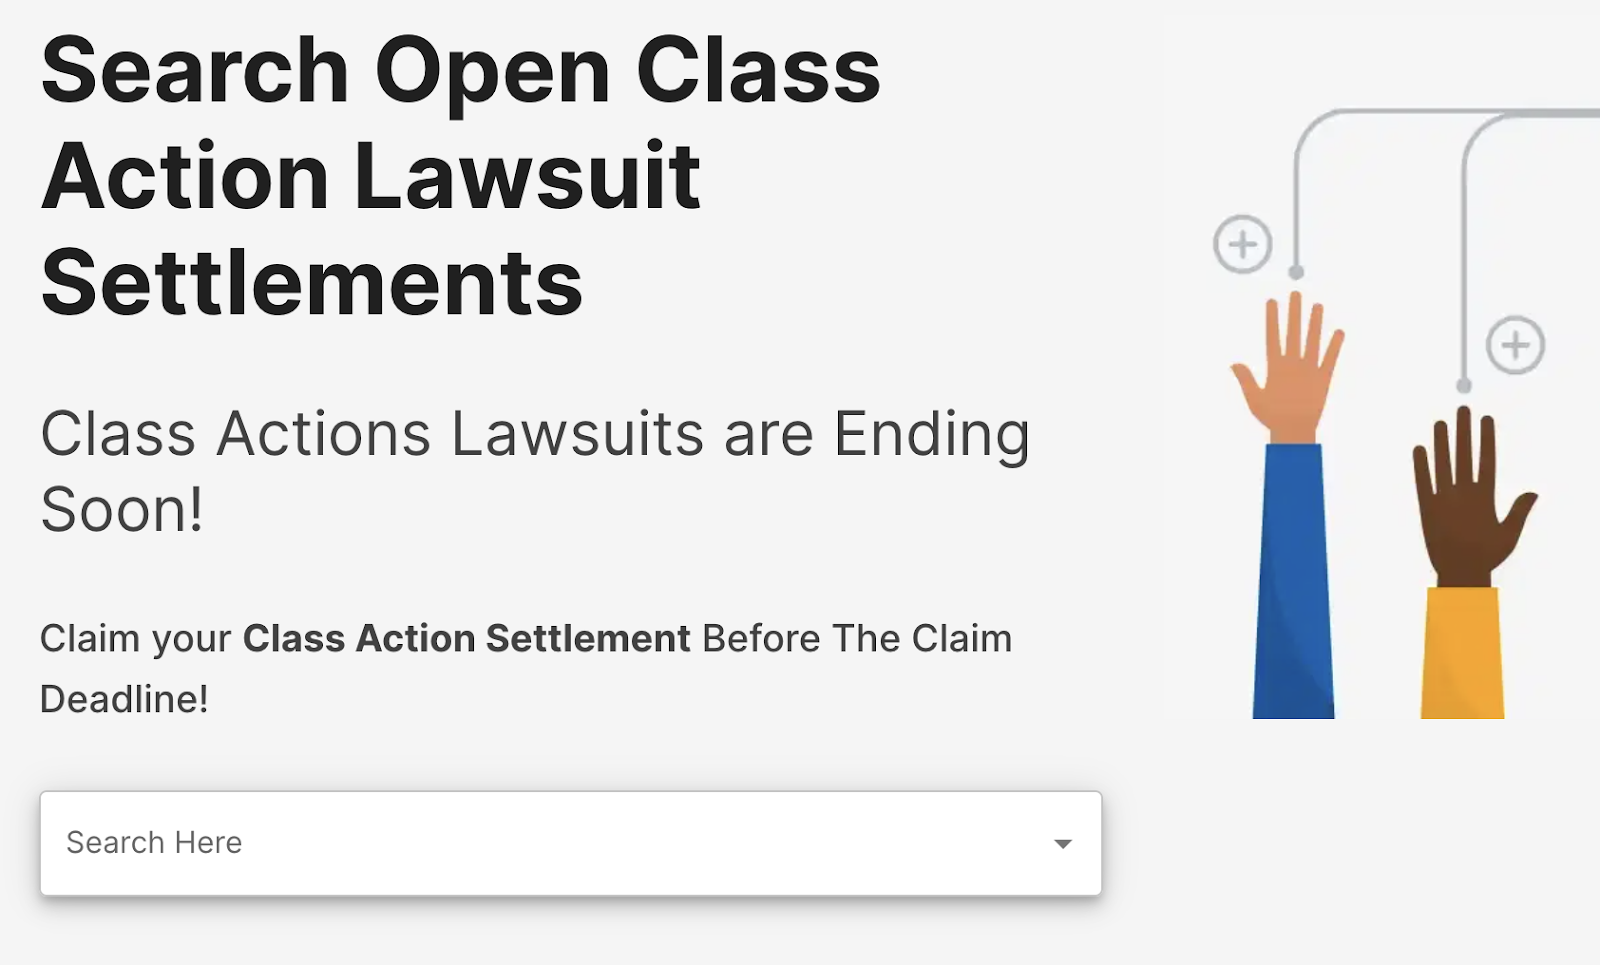 The InjuryClaims.com website offering the opportunity to search for open class action lawsuit settlements that you might qualify for.